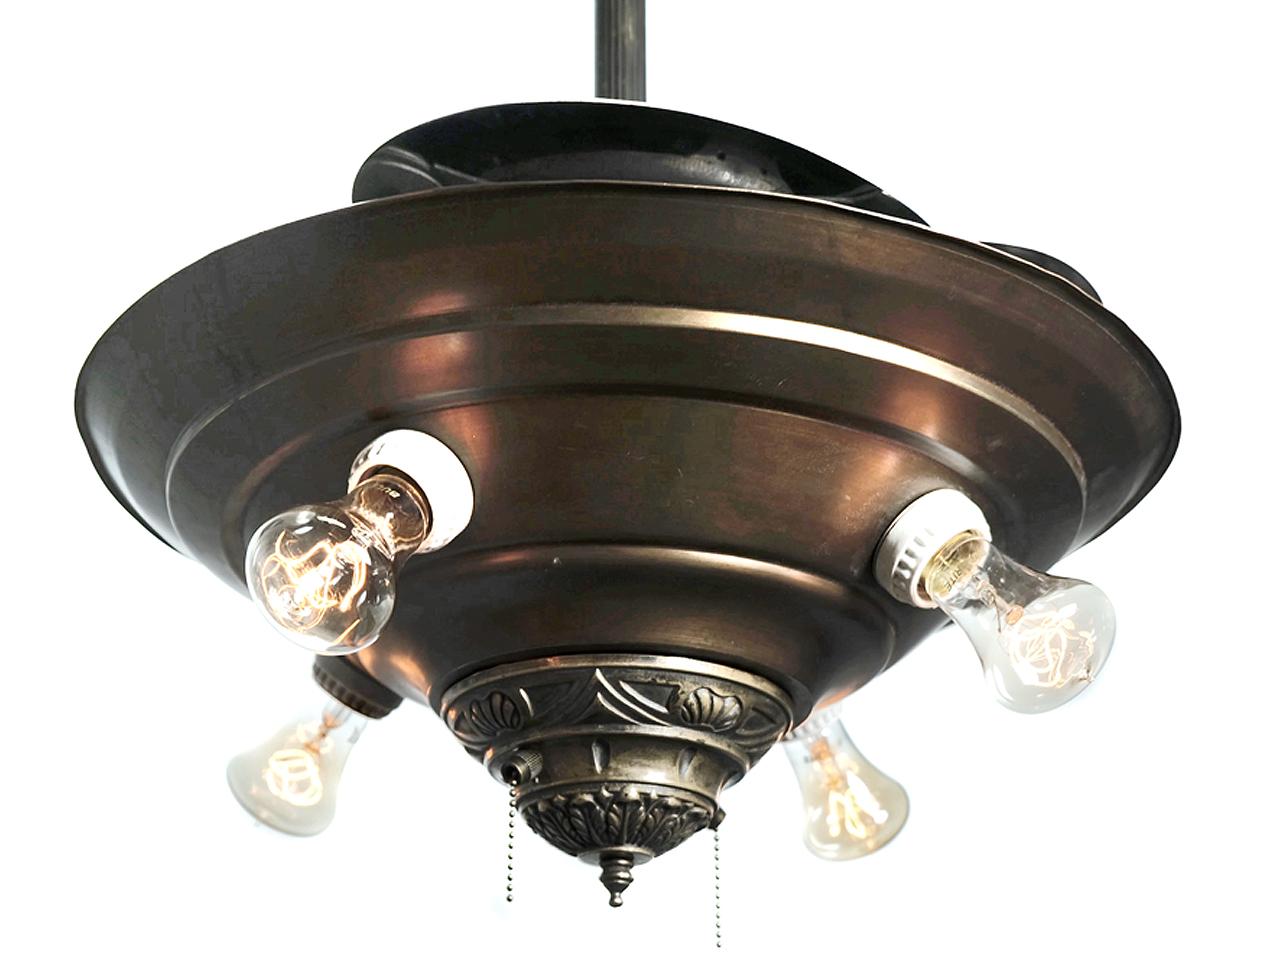 This was the first ever retractable blade ceiling fan to exist in history and an amazing example of Industrial ingenuity. Made from the 1920s-1930s. When the fan turns on, the centrifugal force causes the blades to extend outwards until fully